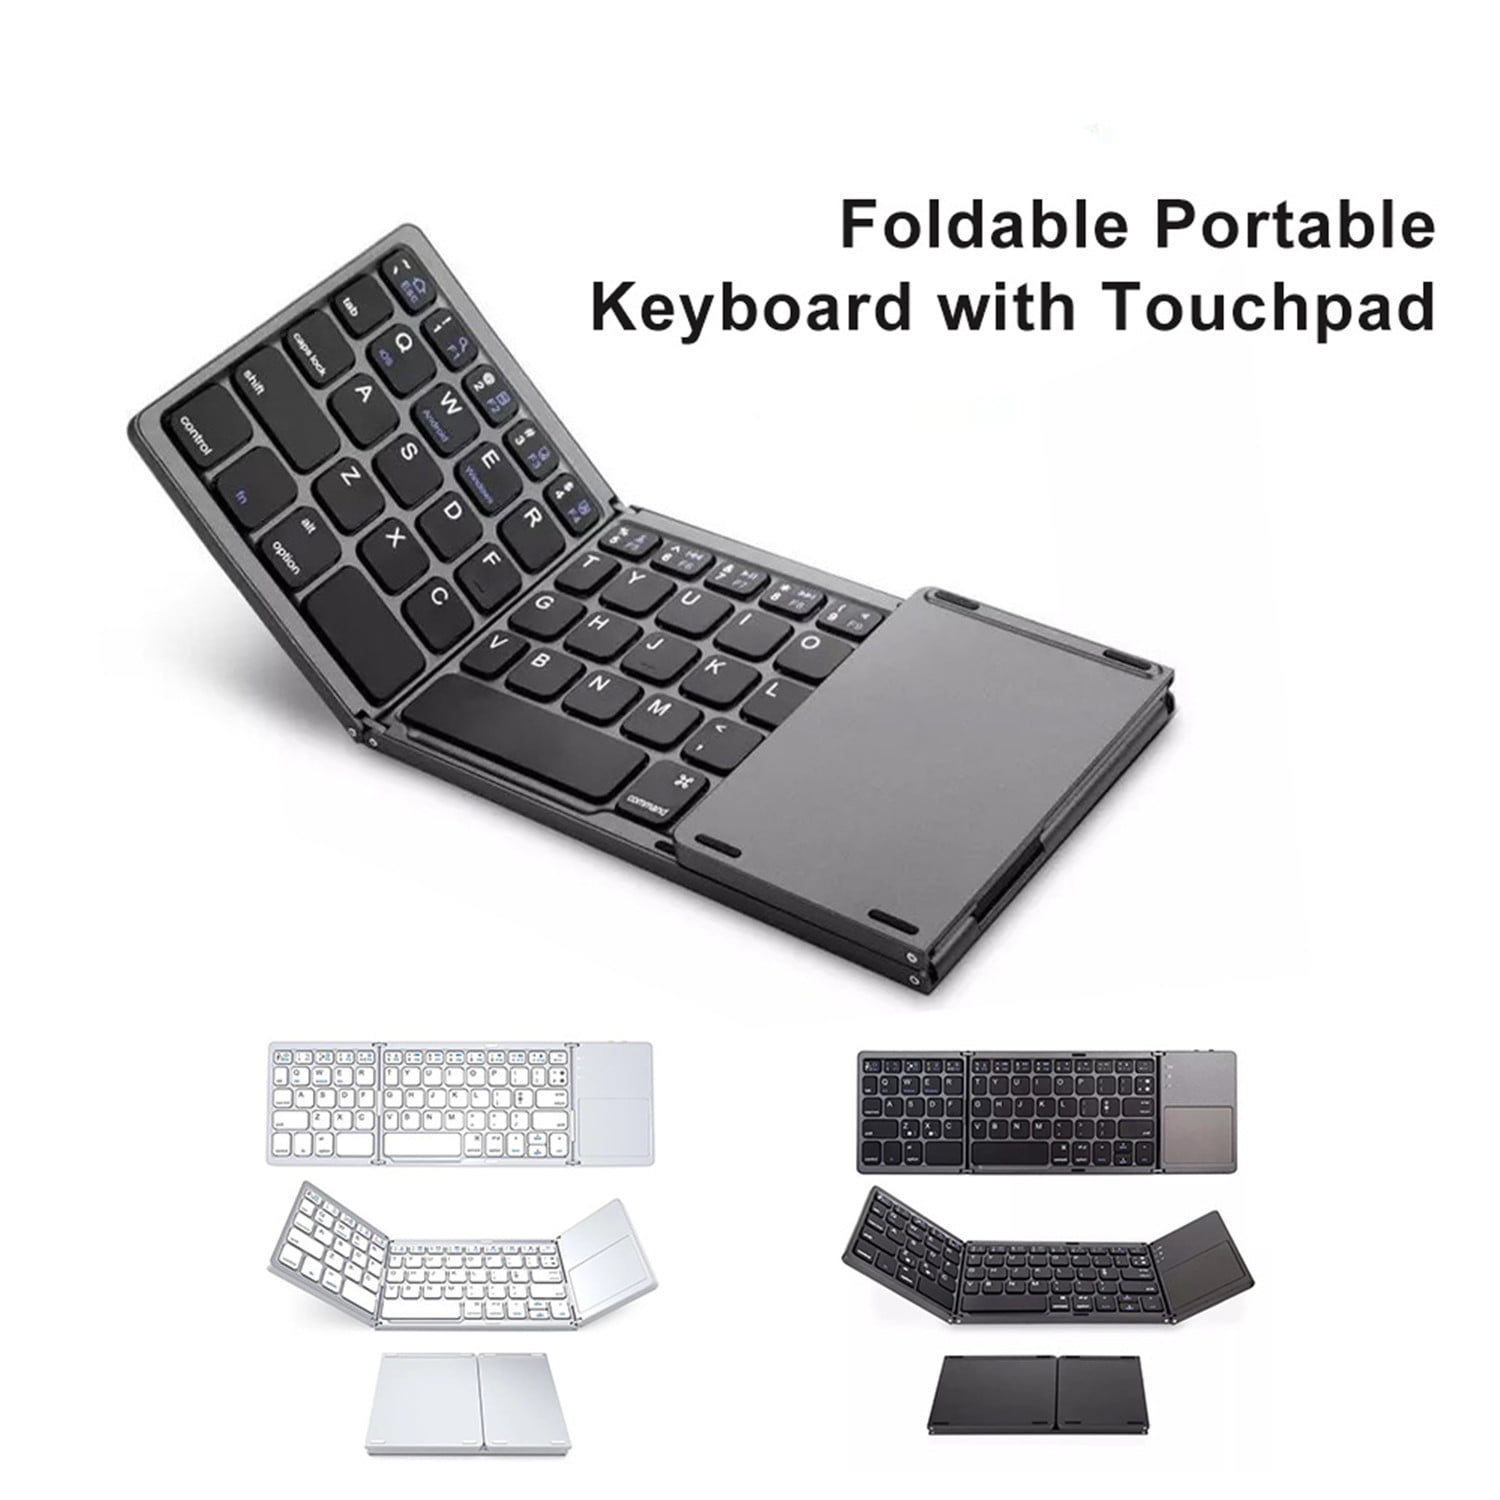 Tek Styz Foldable Bluetooth Keyboard Works for Motorola XT1644 Dual Mode Bluetooth & USB Wired Rechargable Portable Mini BT Wireless Keyboard with Touchpad Mouse! 